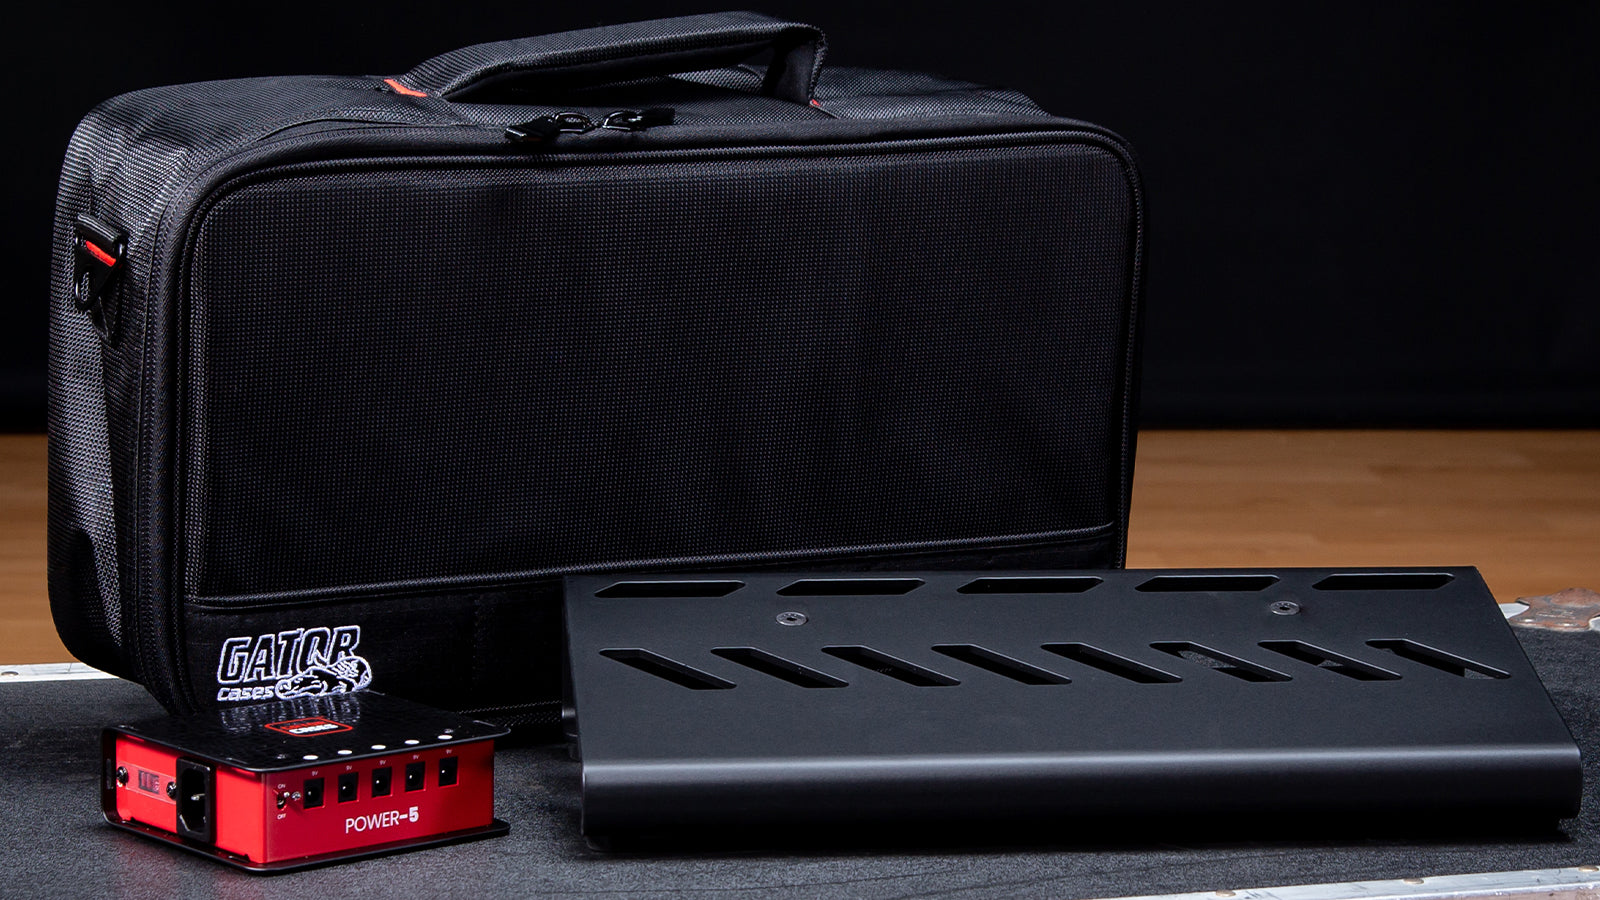 A Gator case, pedalboard, and power supply on a road case